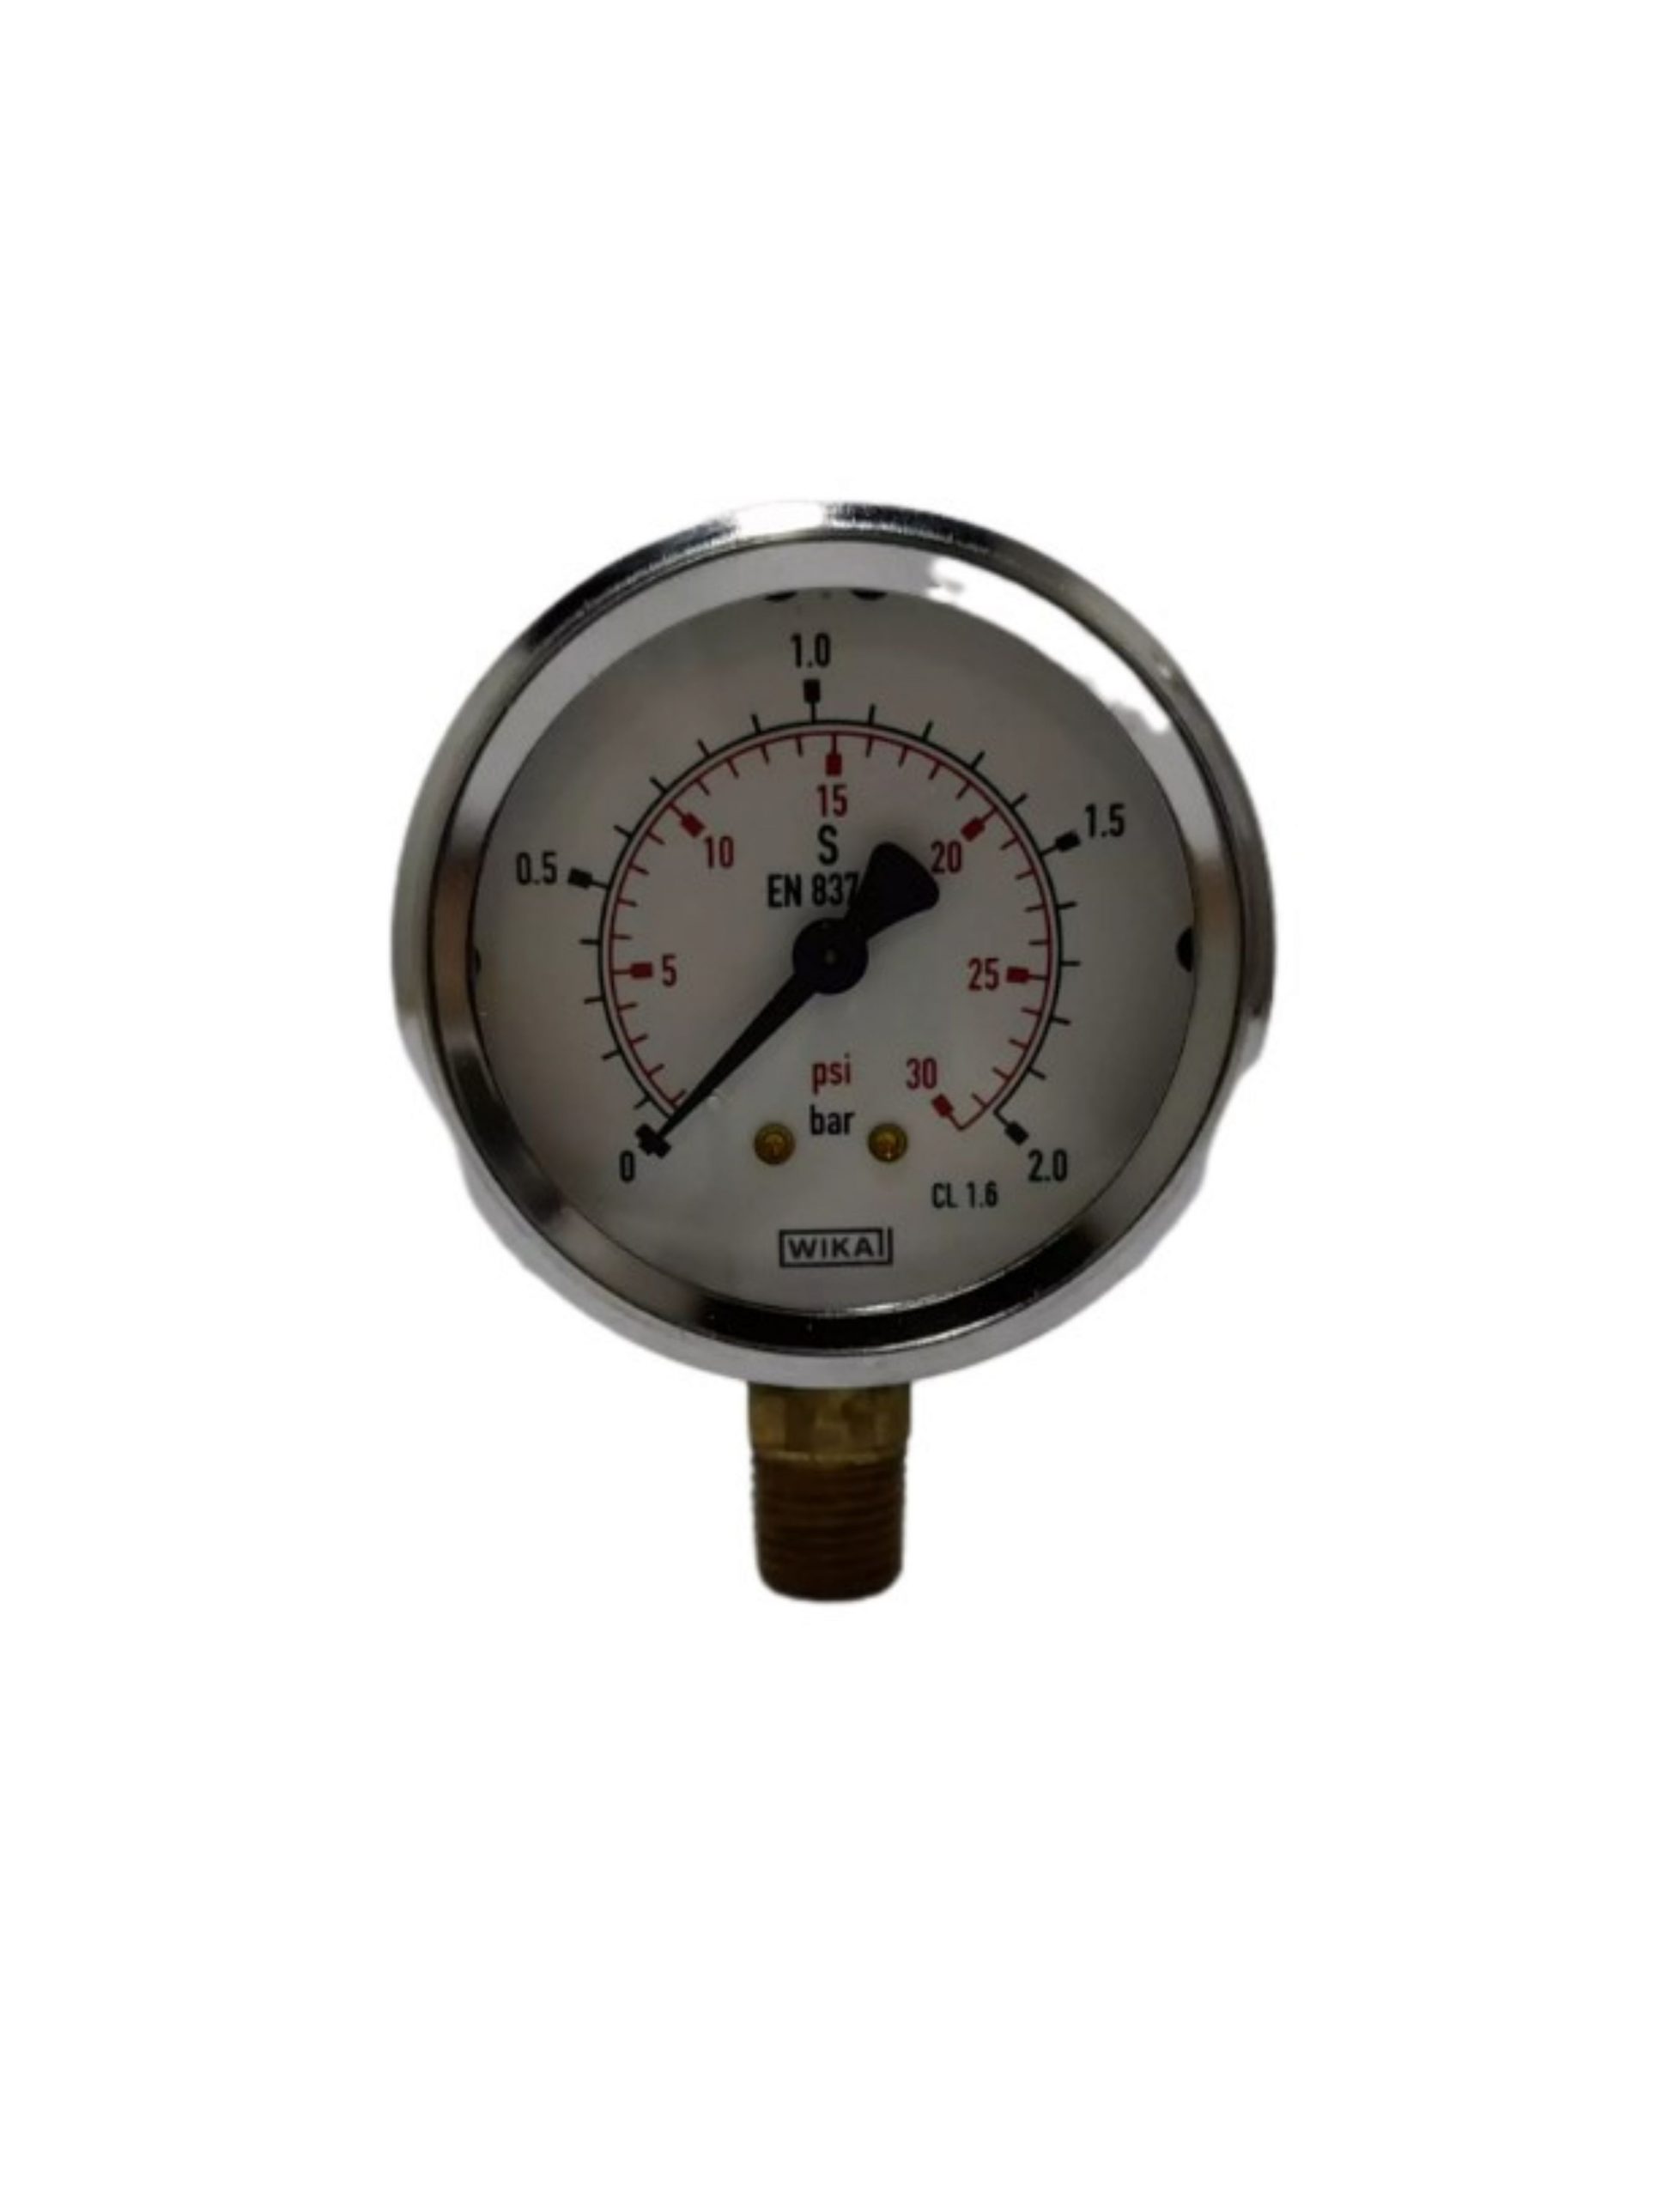 PRESSURE GAUGE 0-2 BAR , DIAMETER 2 1/2 Inches CONNECTION 1/4 Inches , WIKA from Gas Equipment Company Llc Abu Dhabi, UNITED ARAB EMIRATES